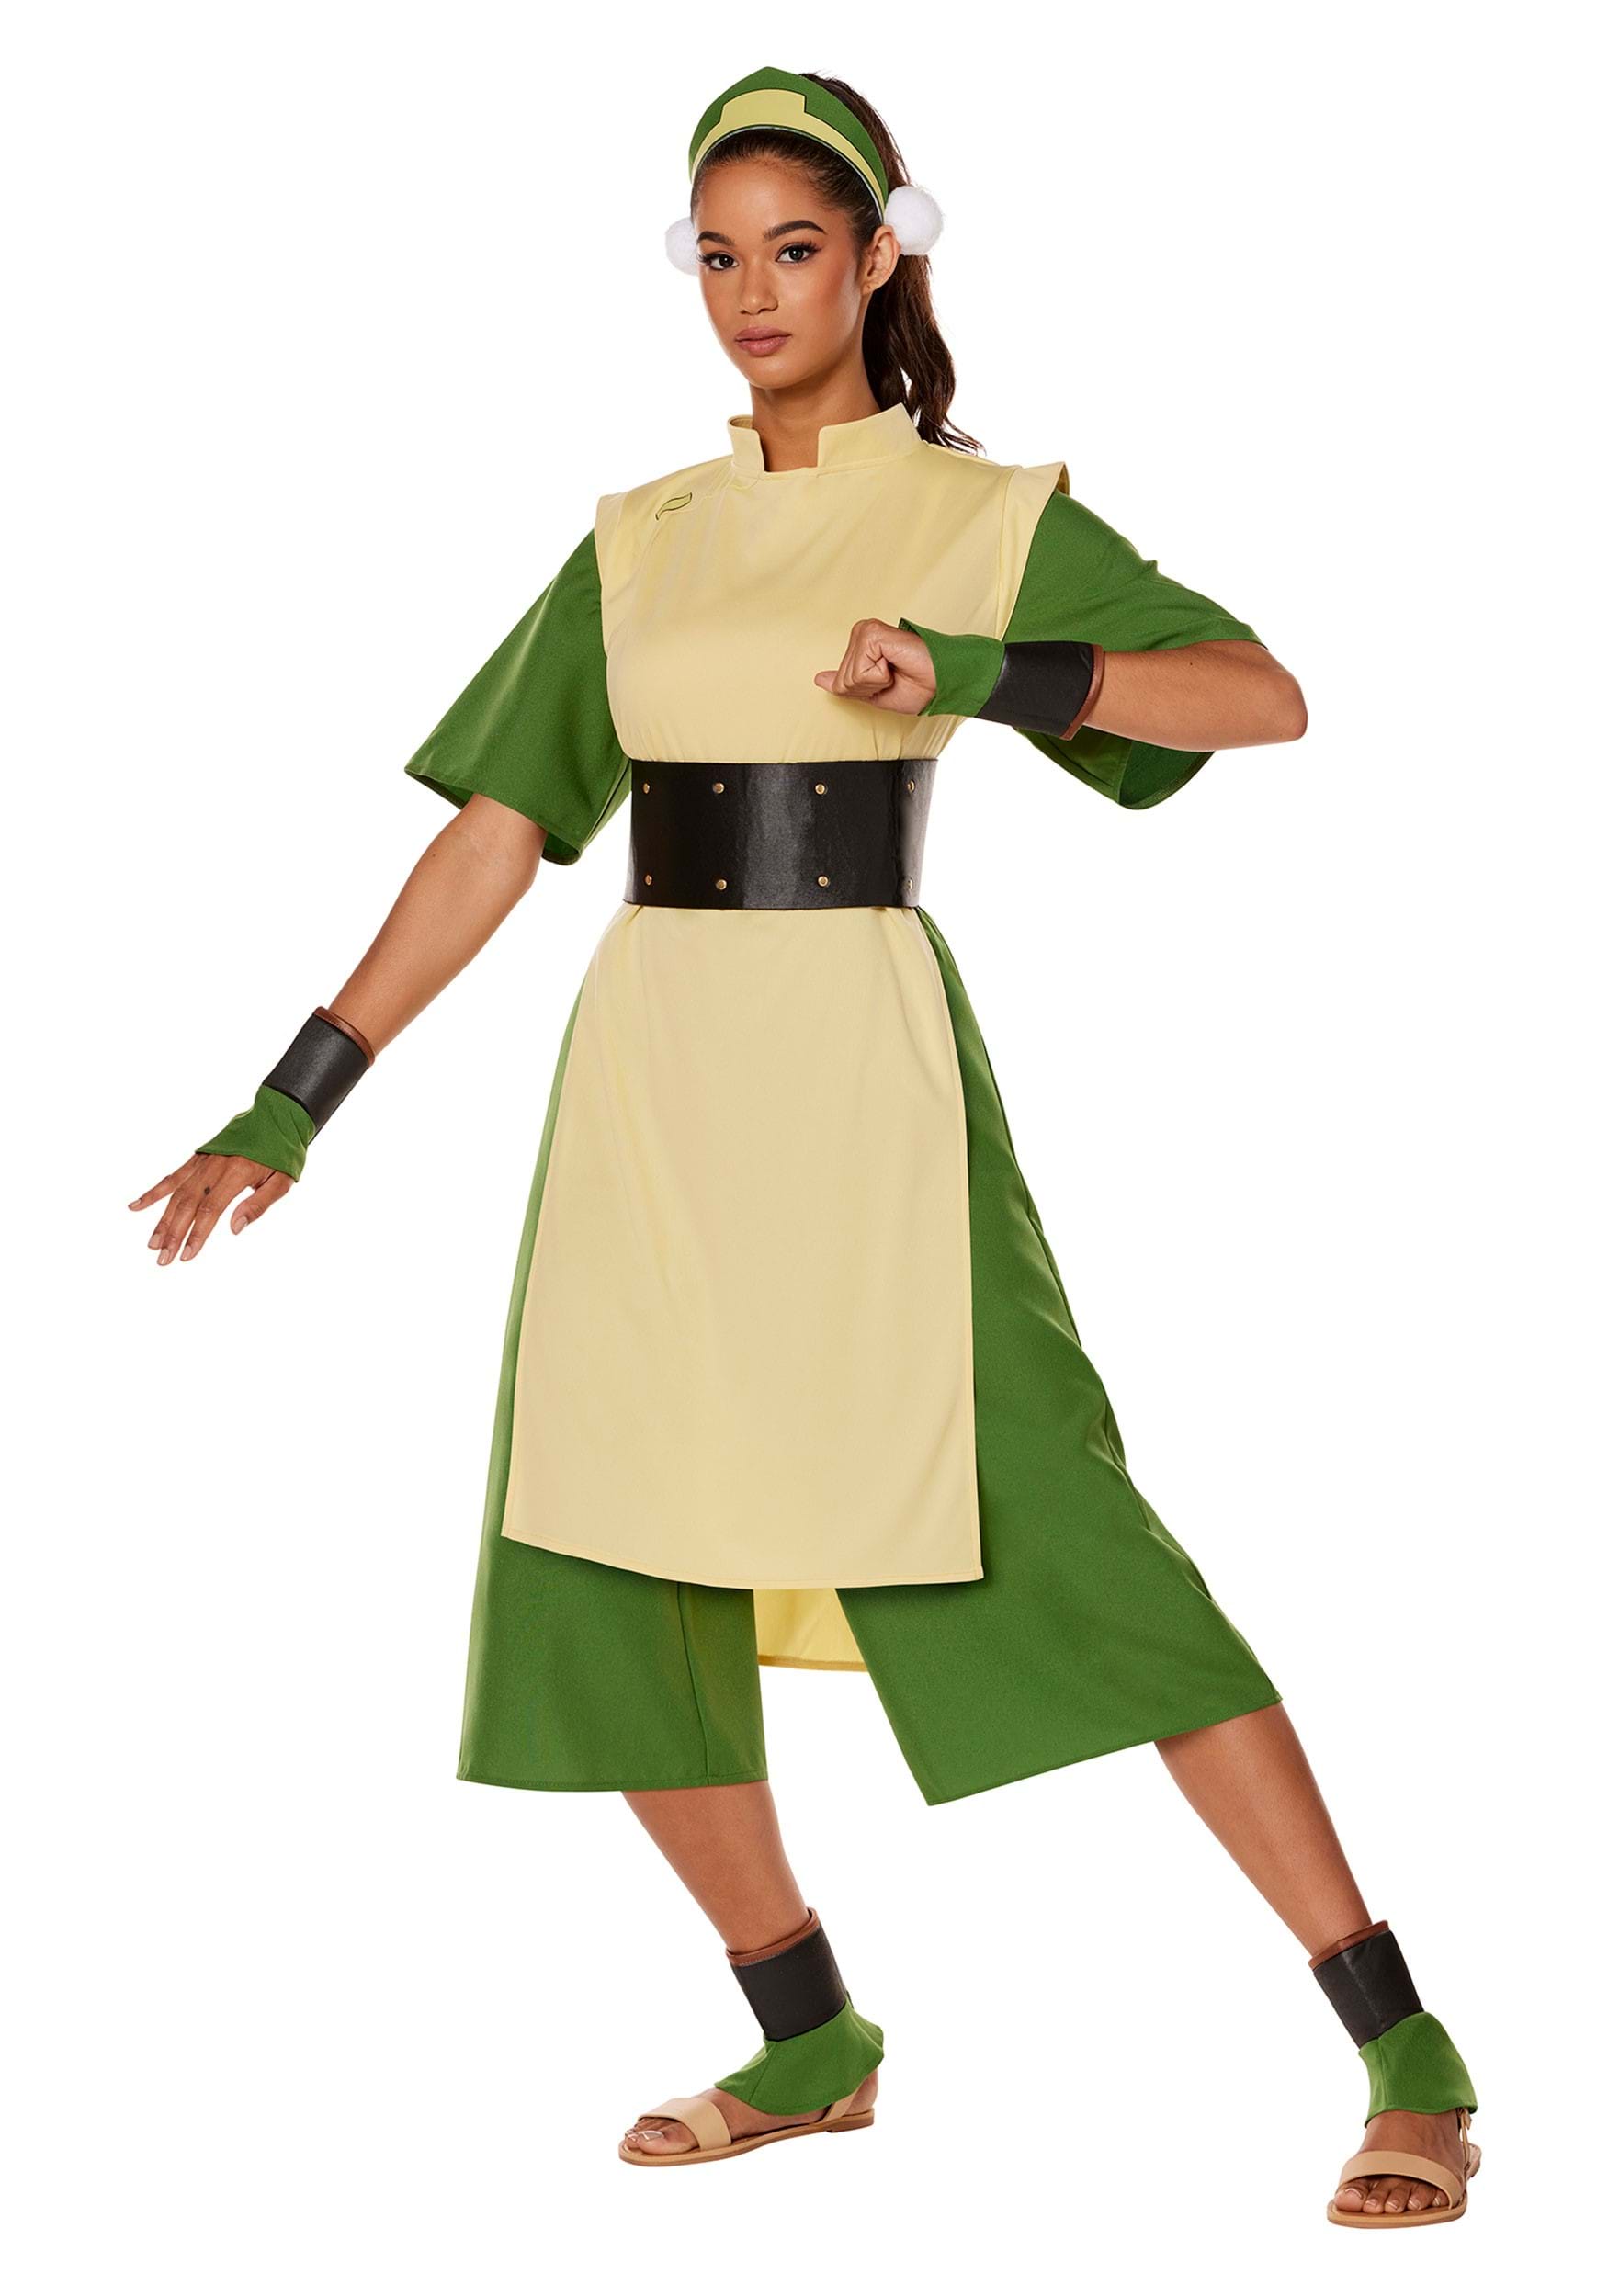 Earthbender clothes